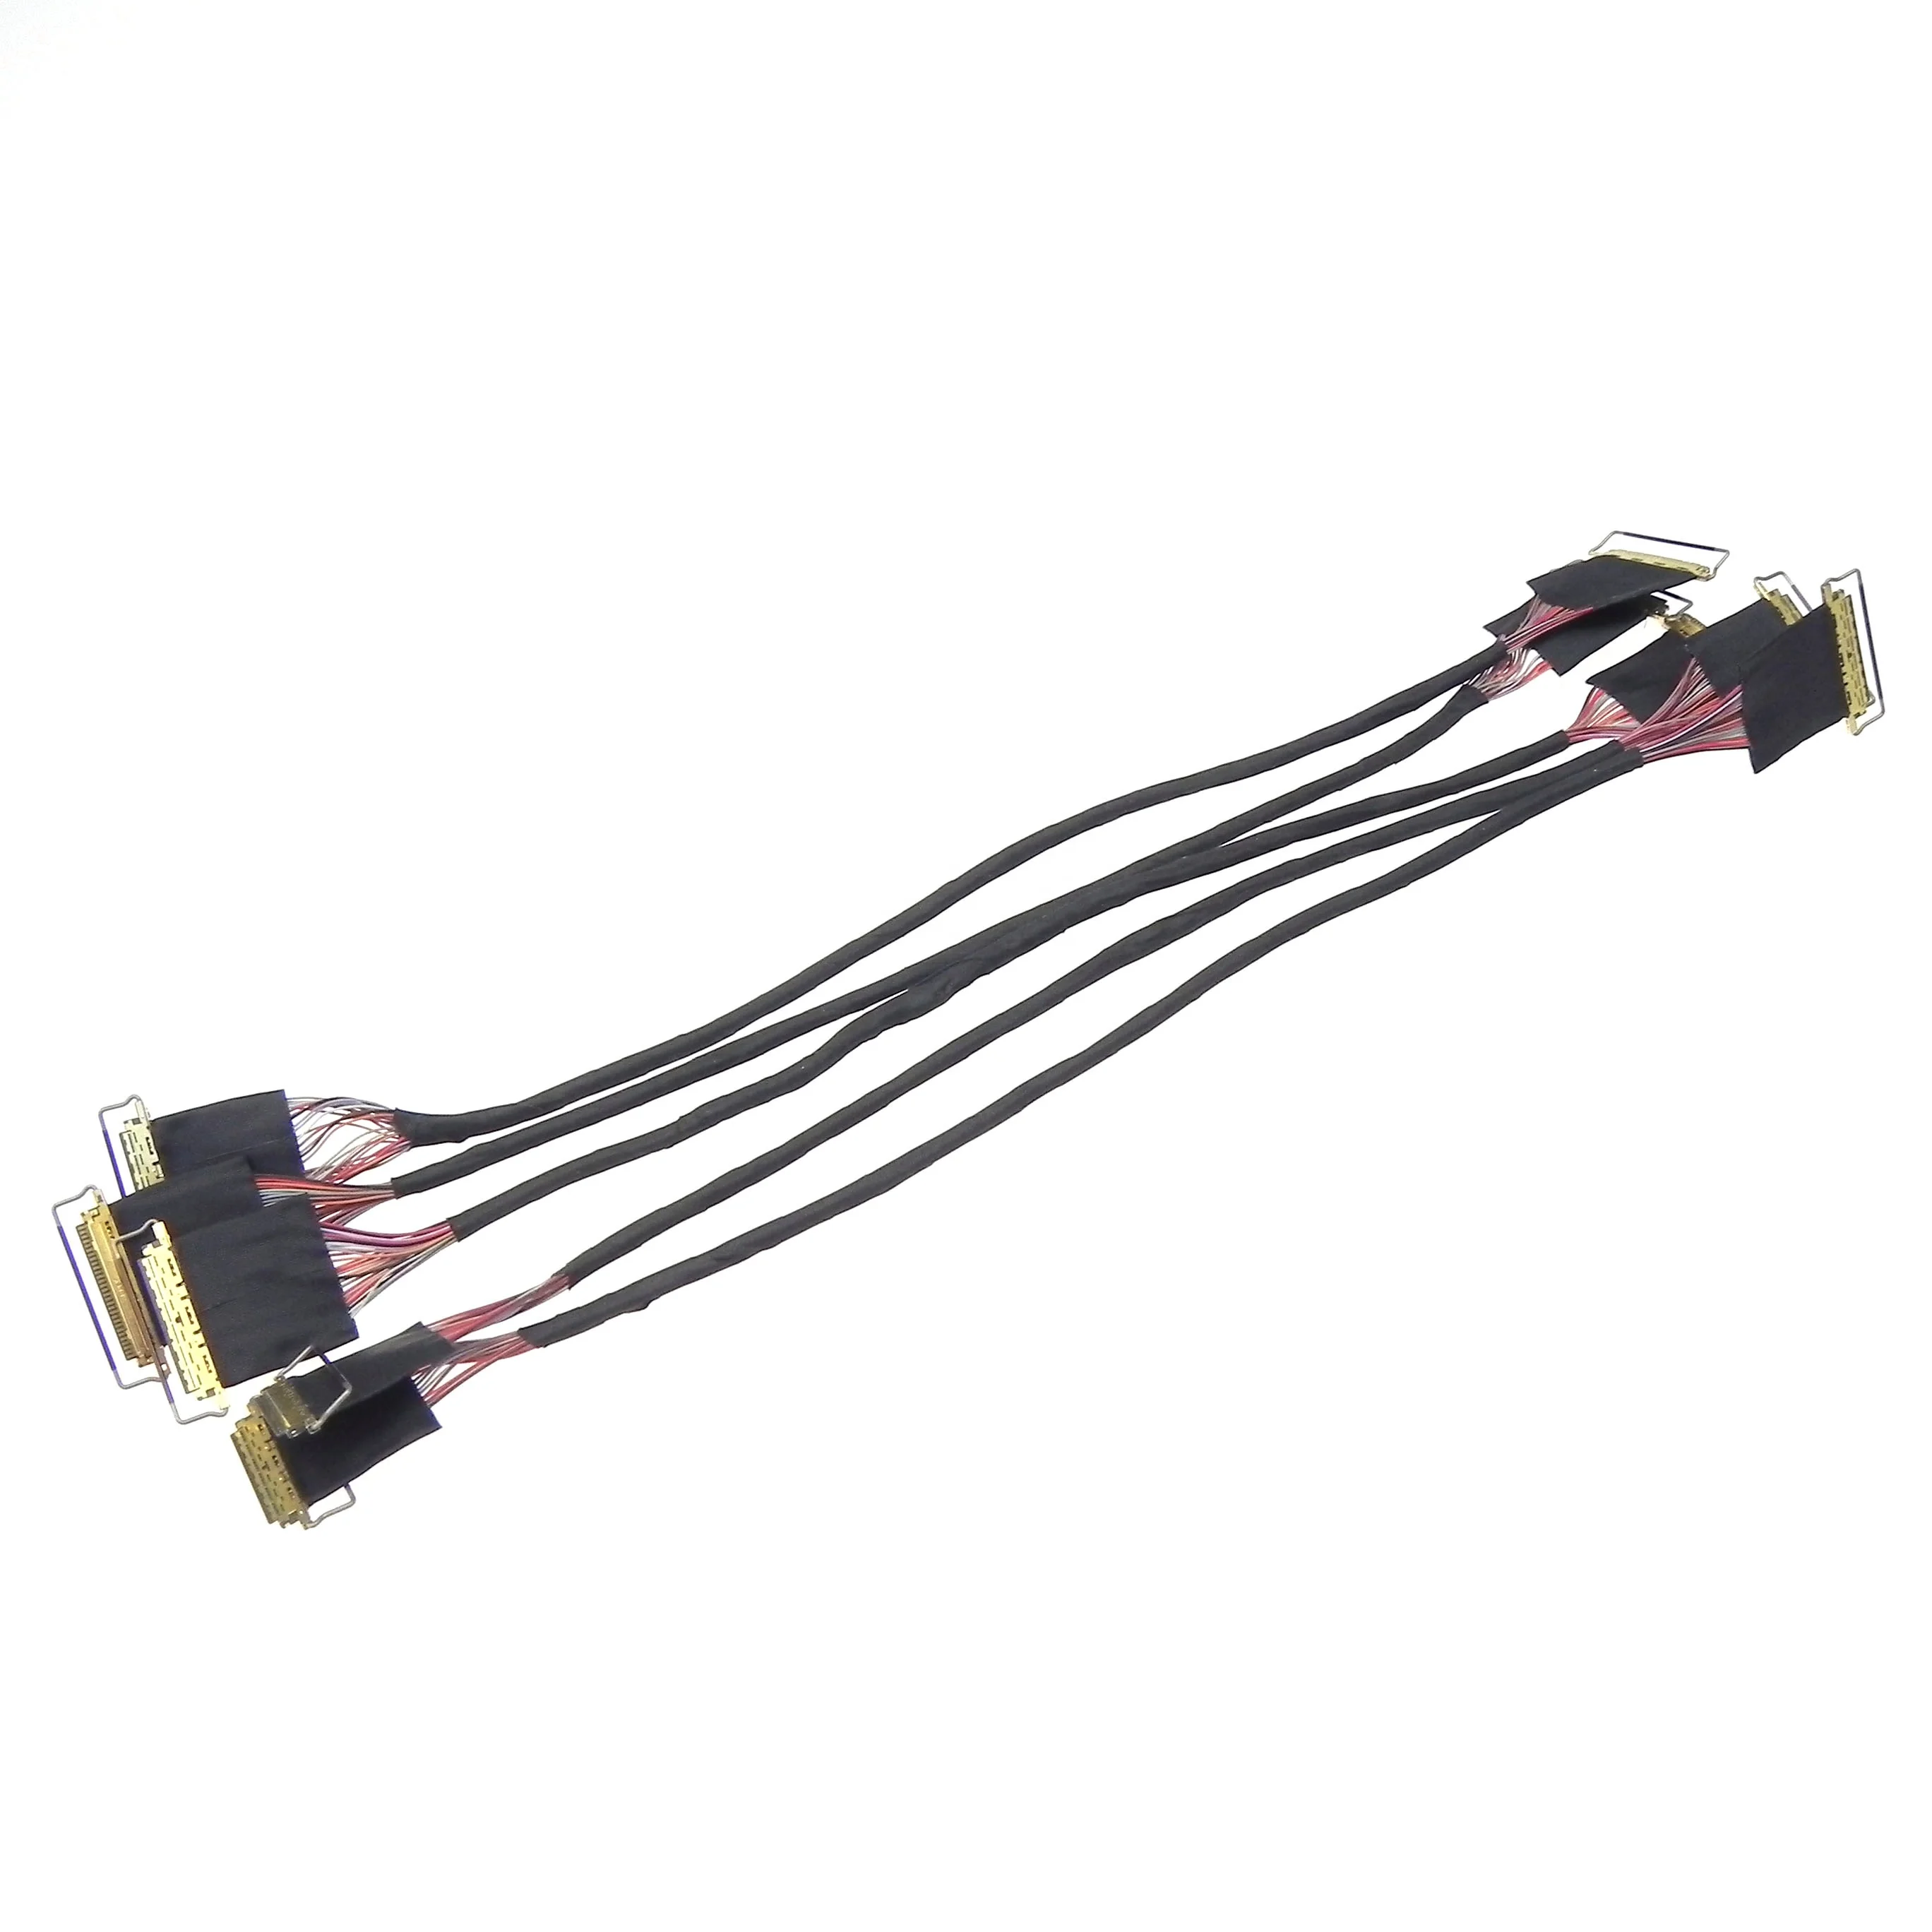 Source Customized 30pin micro coaxial lvds I-pex cable for lcd panel on  m.